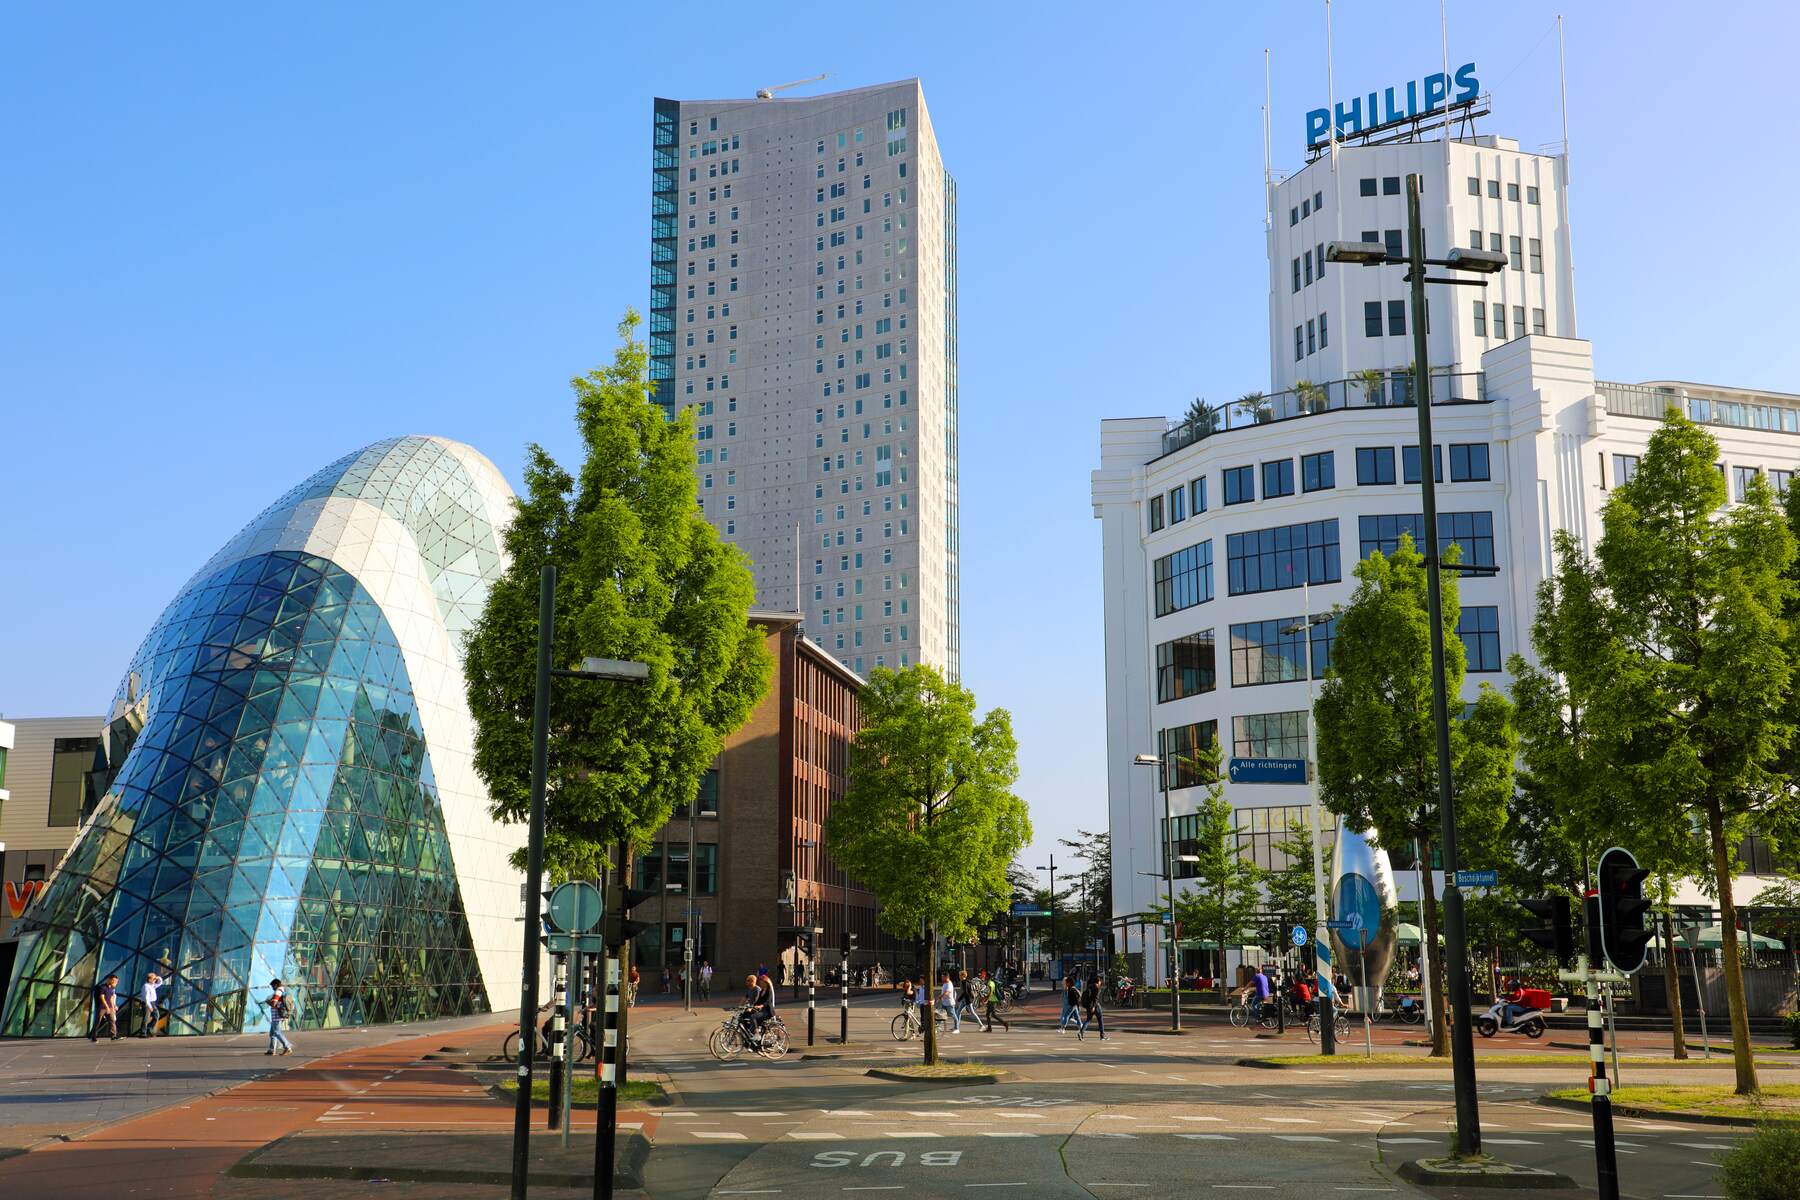 Philips building in Eindhoven city center